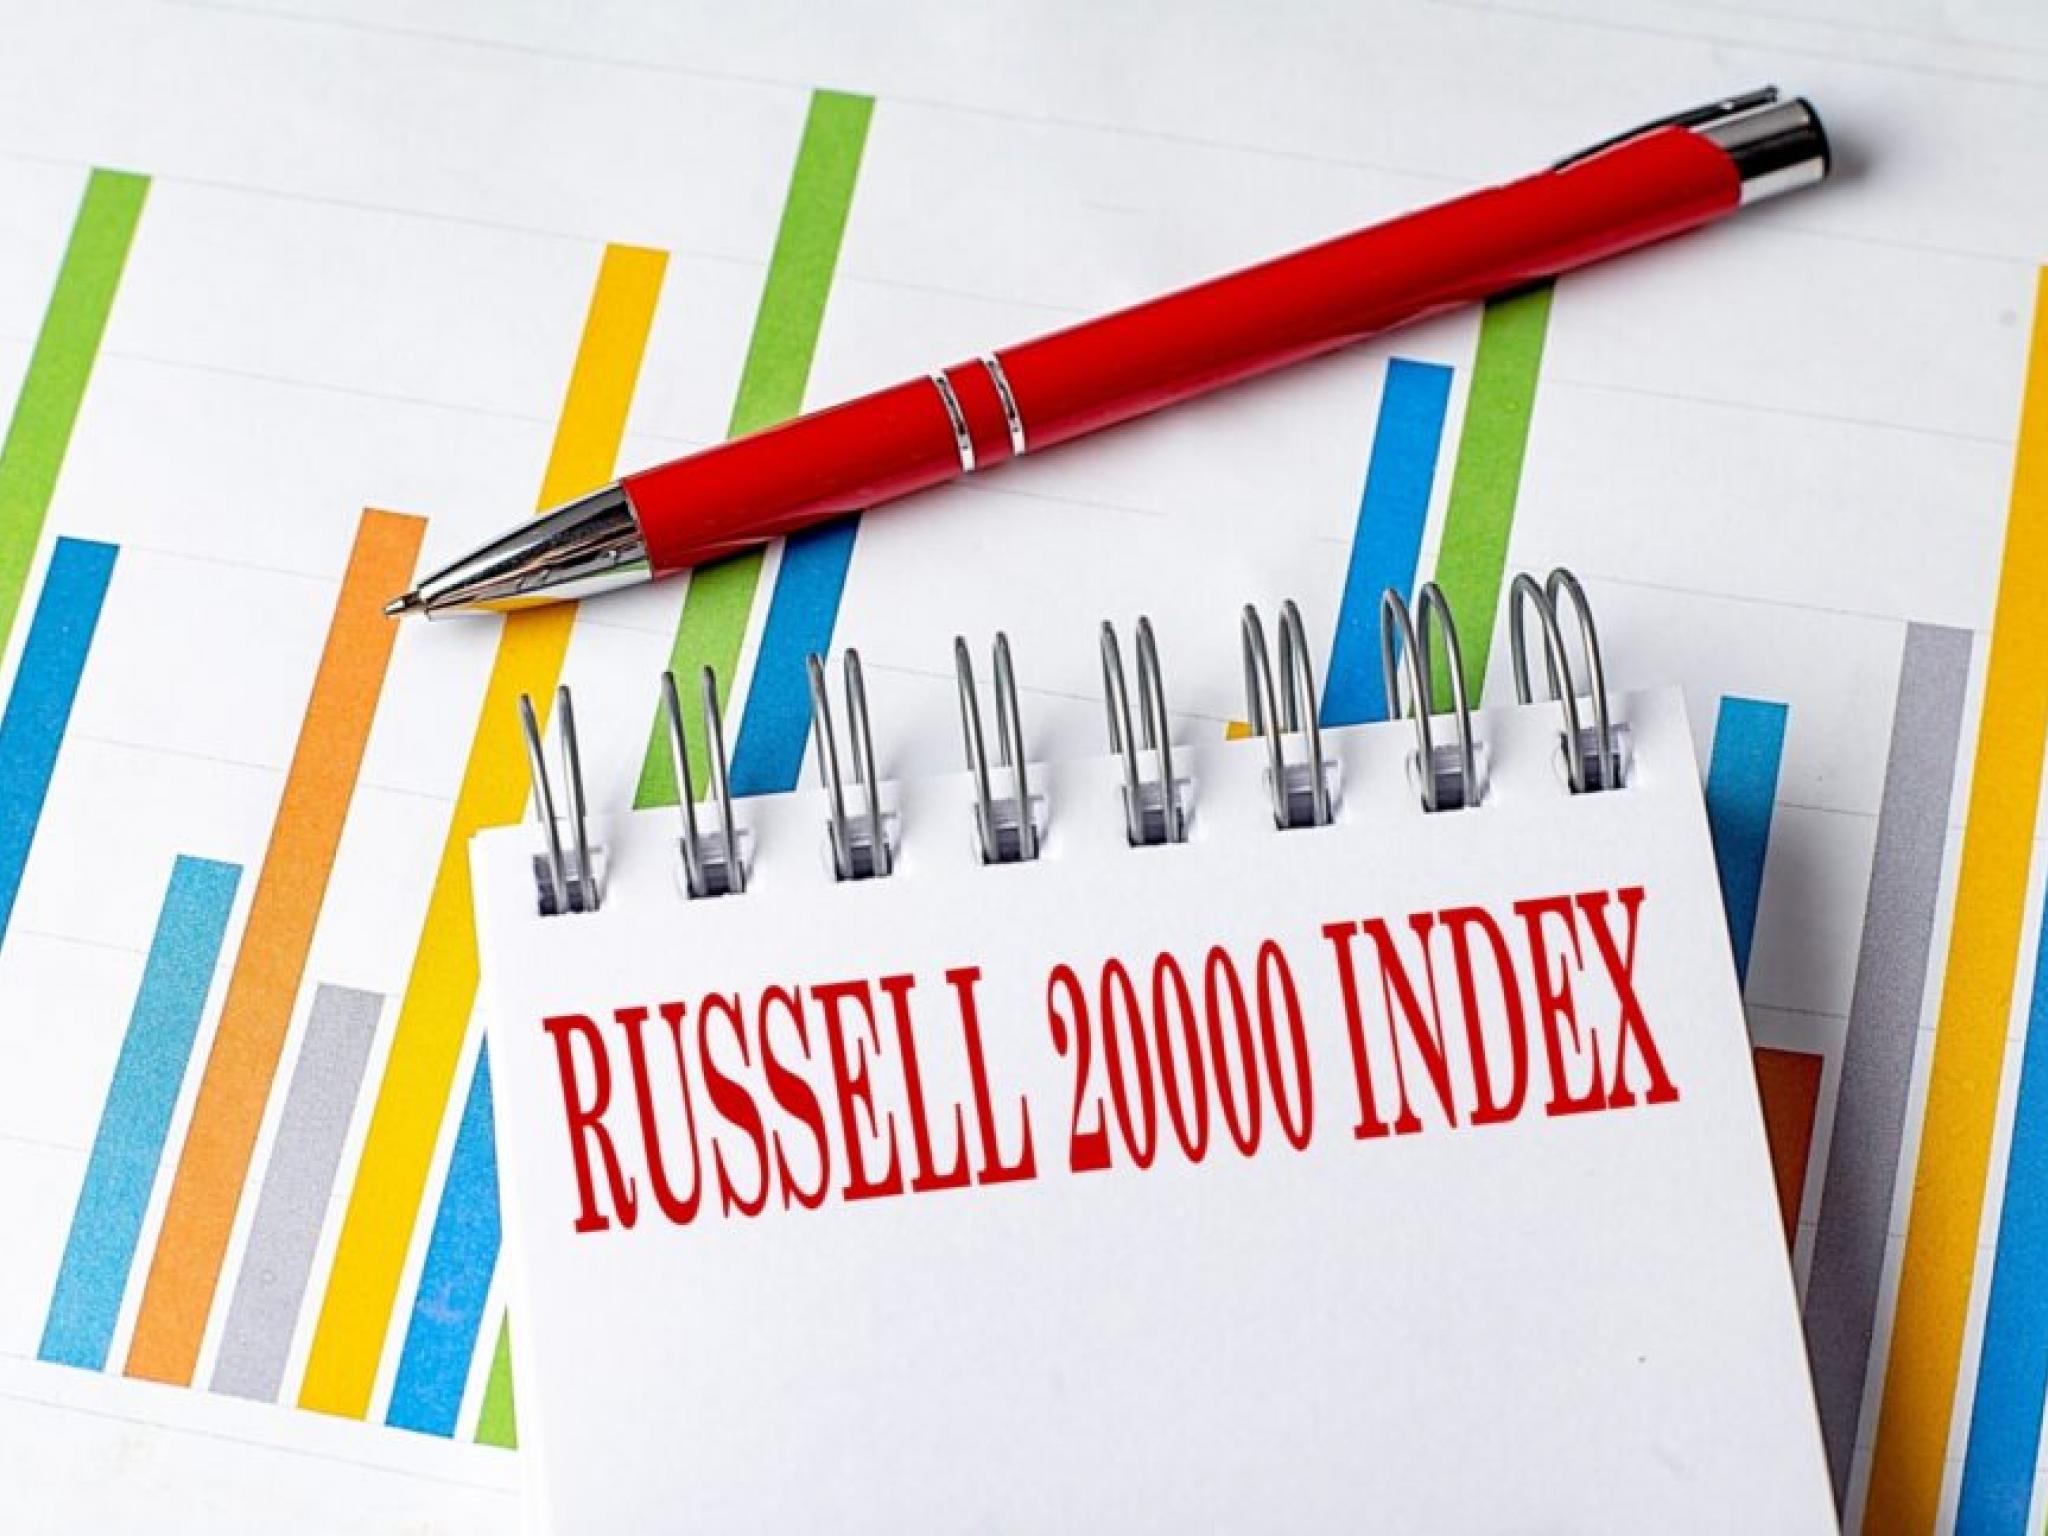  inflation-drop-fuels-rate-cut-speculation-investors-shift-to-sector-laggards-russell-2000-surges-over-36-this-week-in-the-markets 